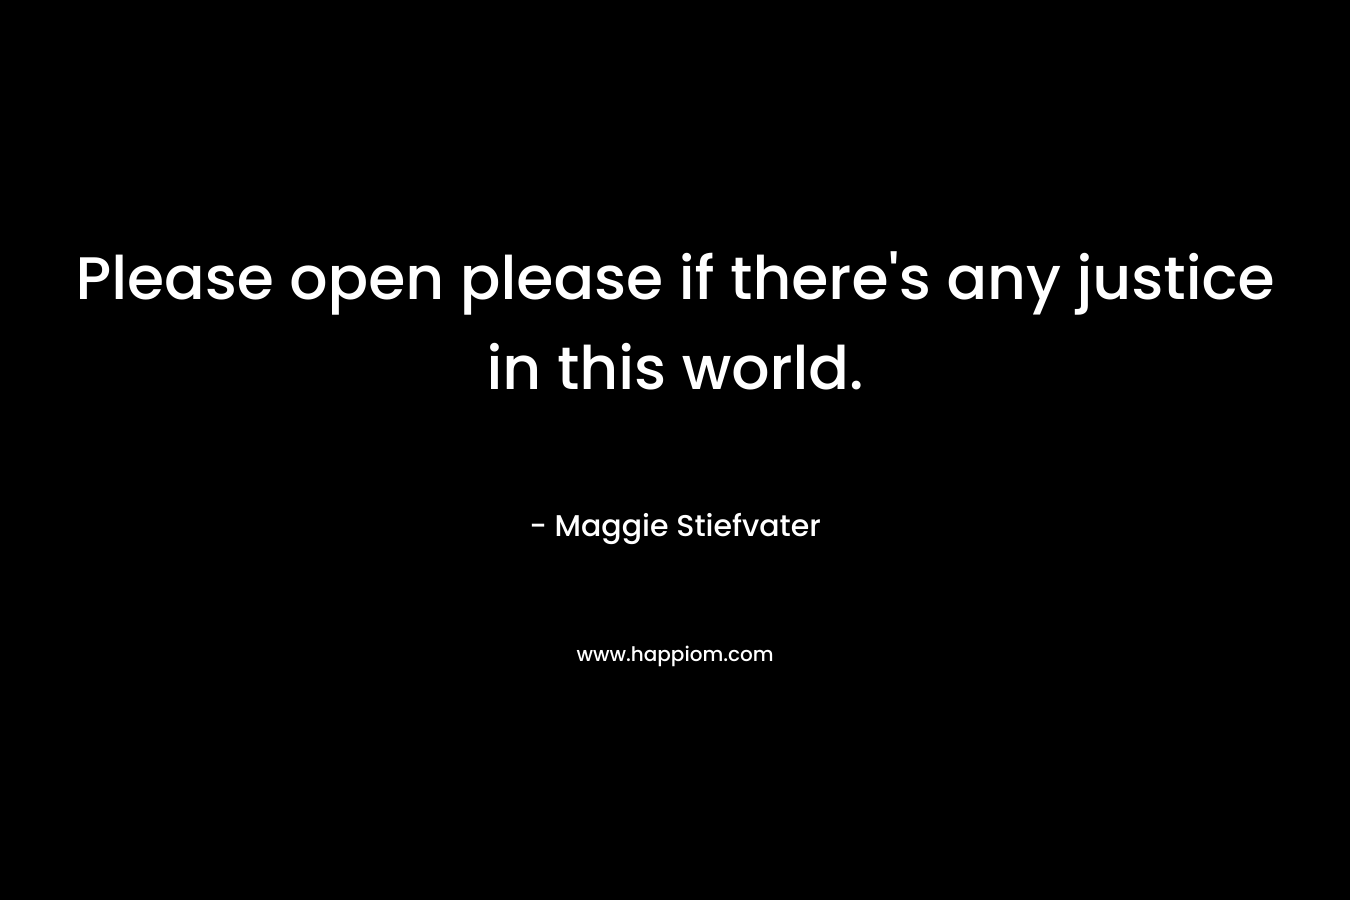 Please open please if there’s any justice in this world. – Maggie Stiefvater